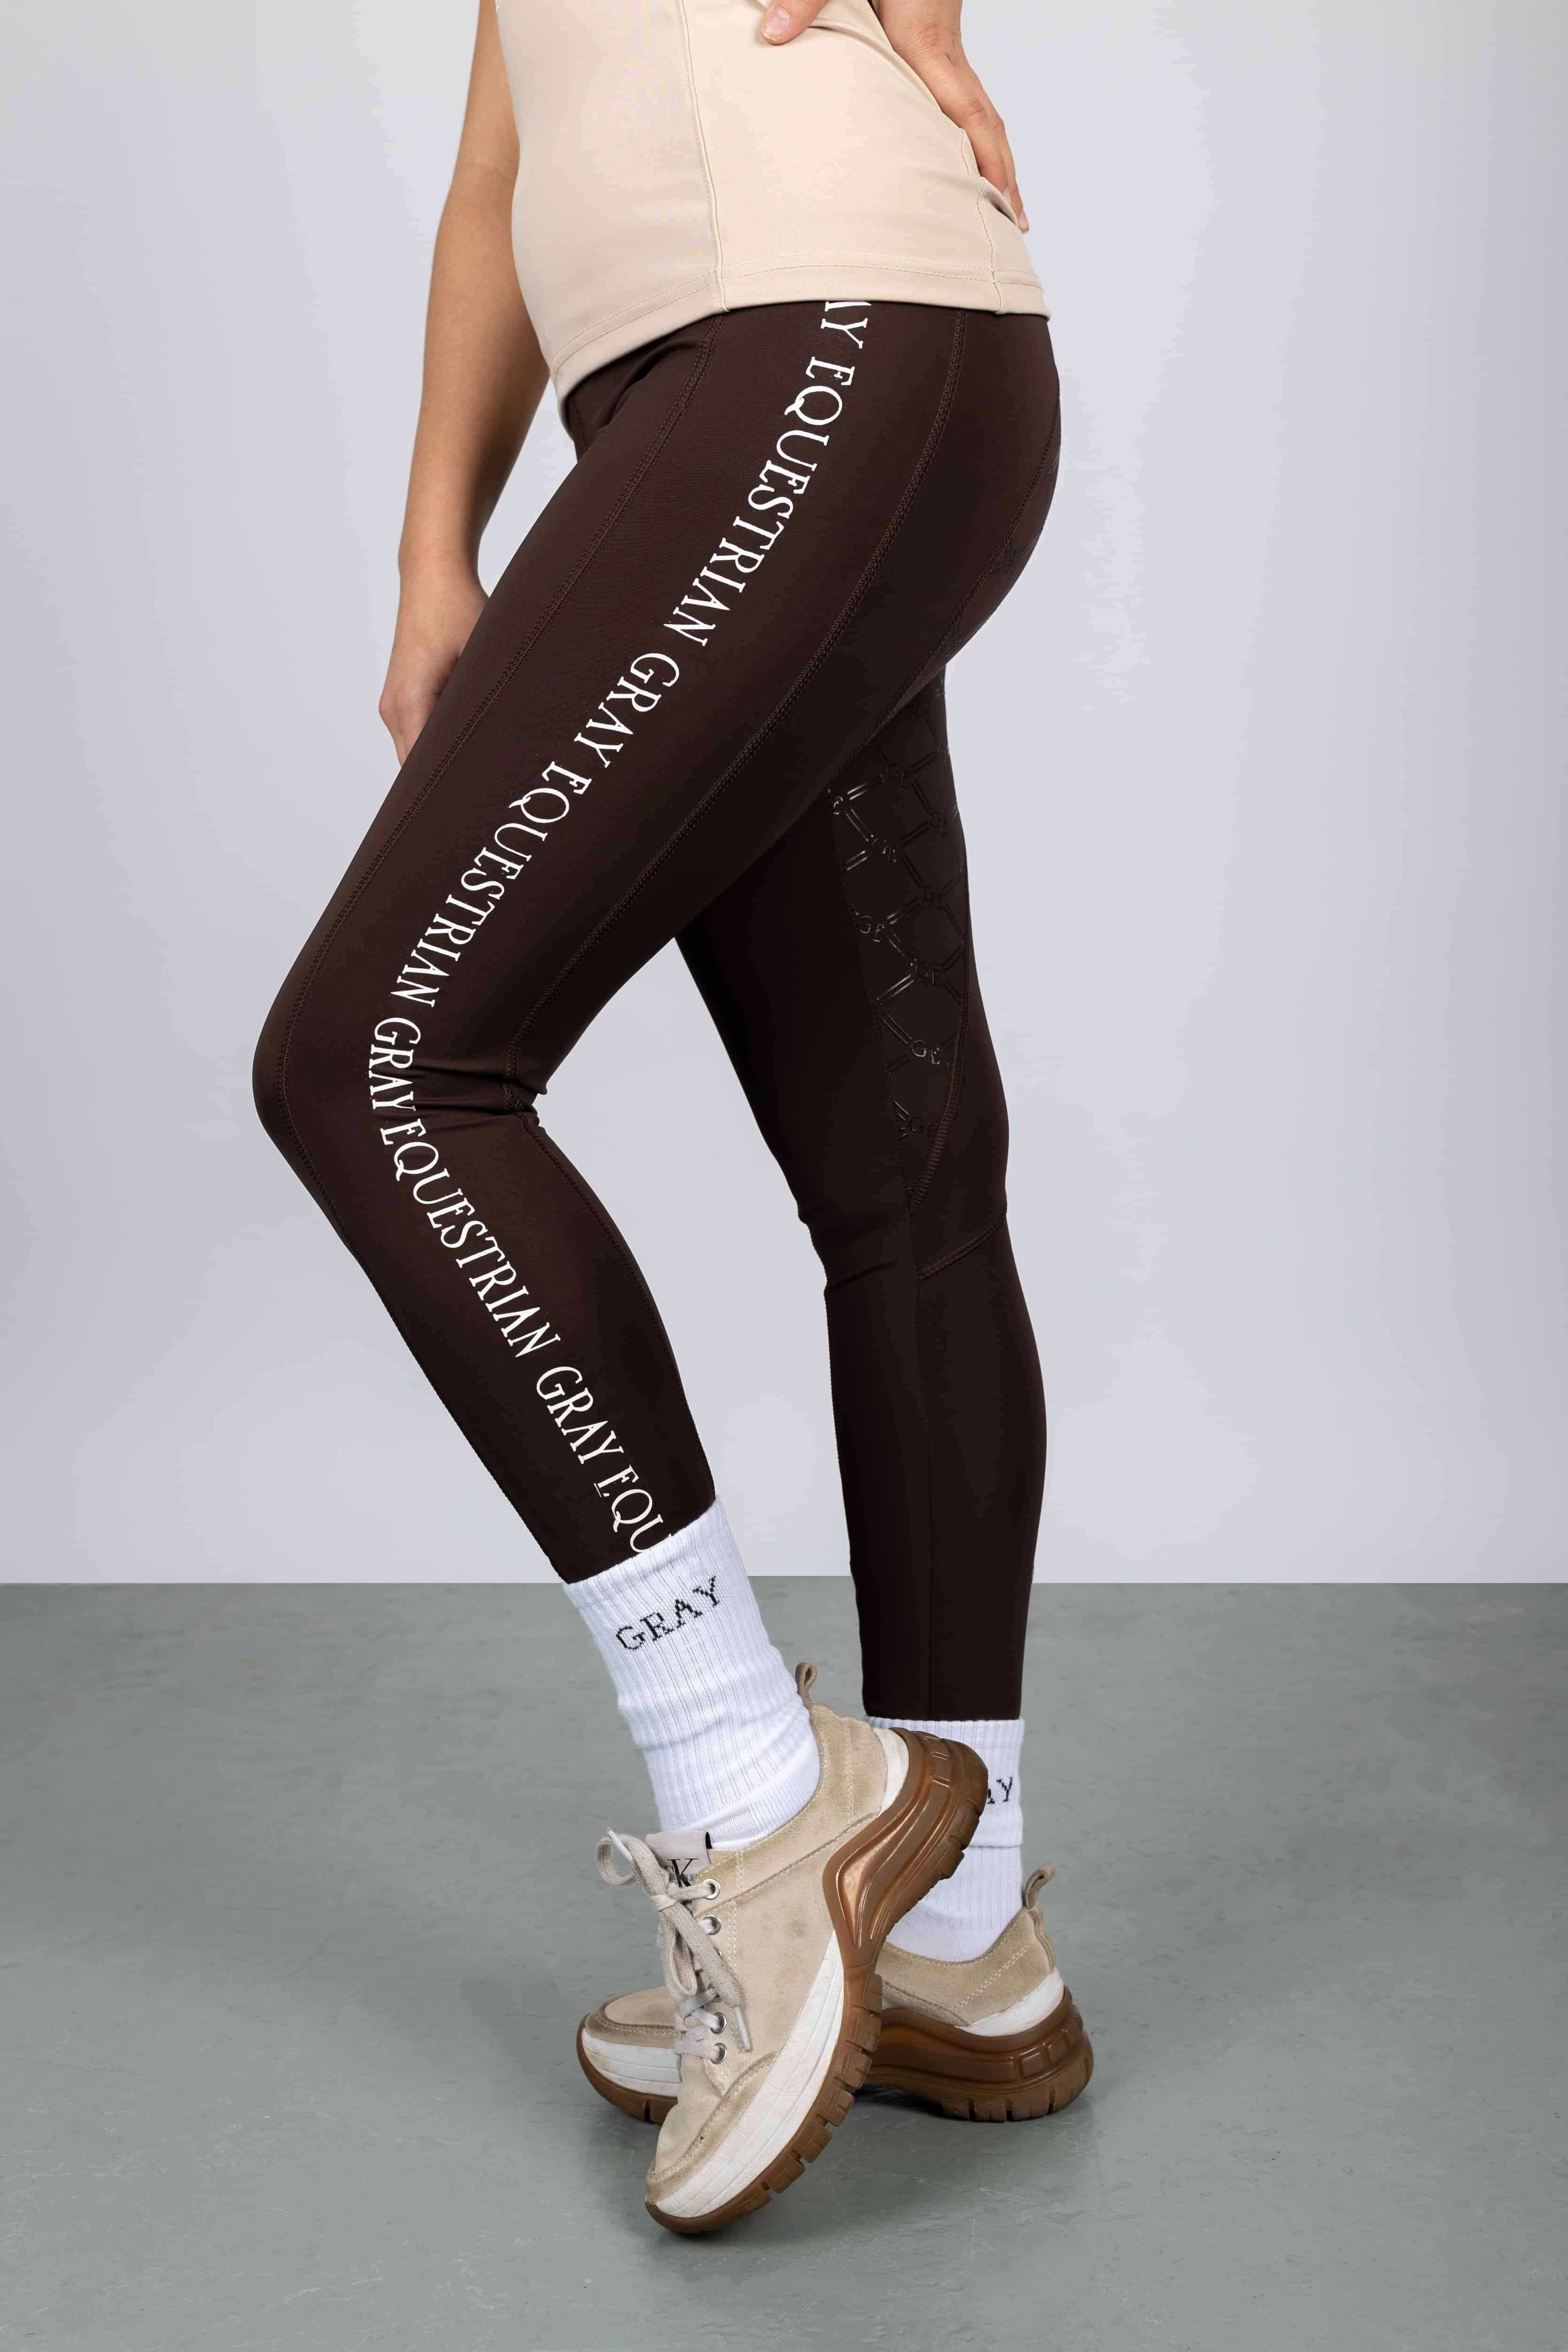 A model wearing our brown renew leggings with white Grey Equestrian branding down the side.